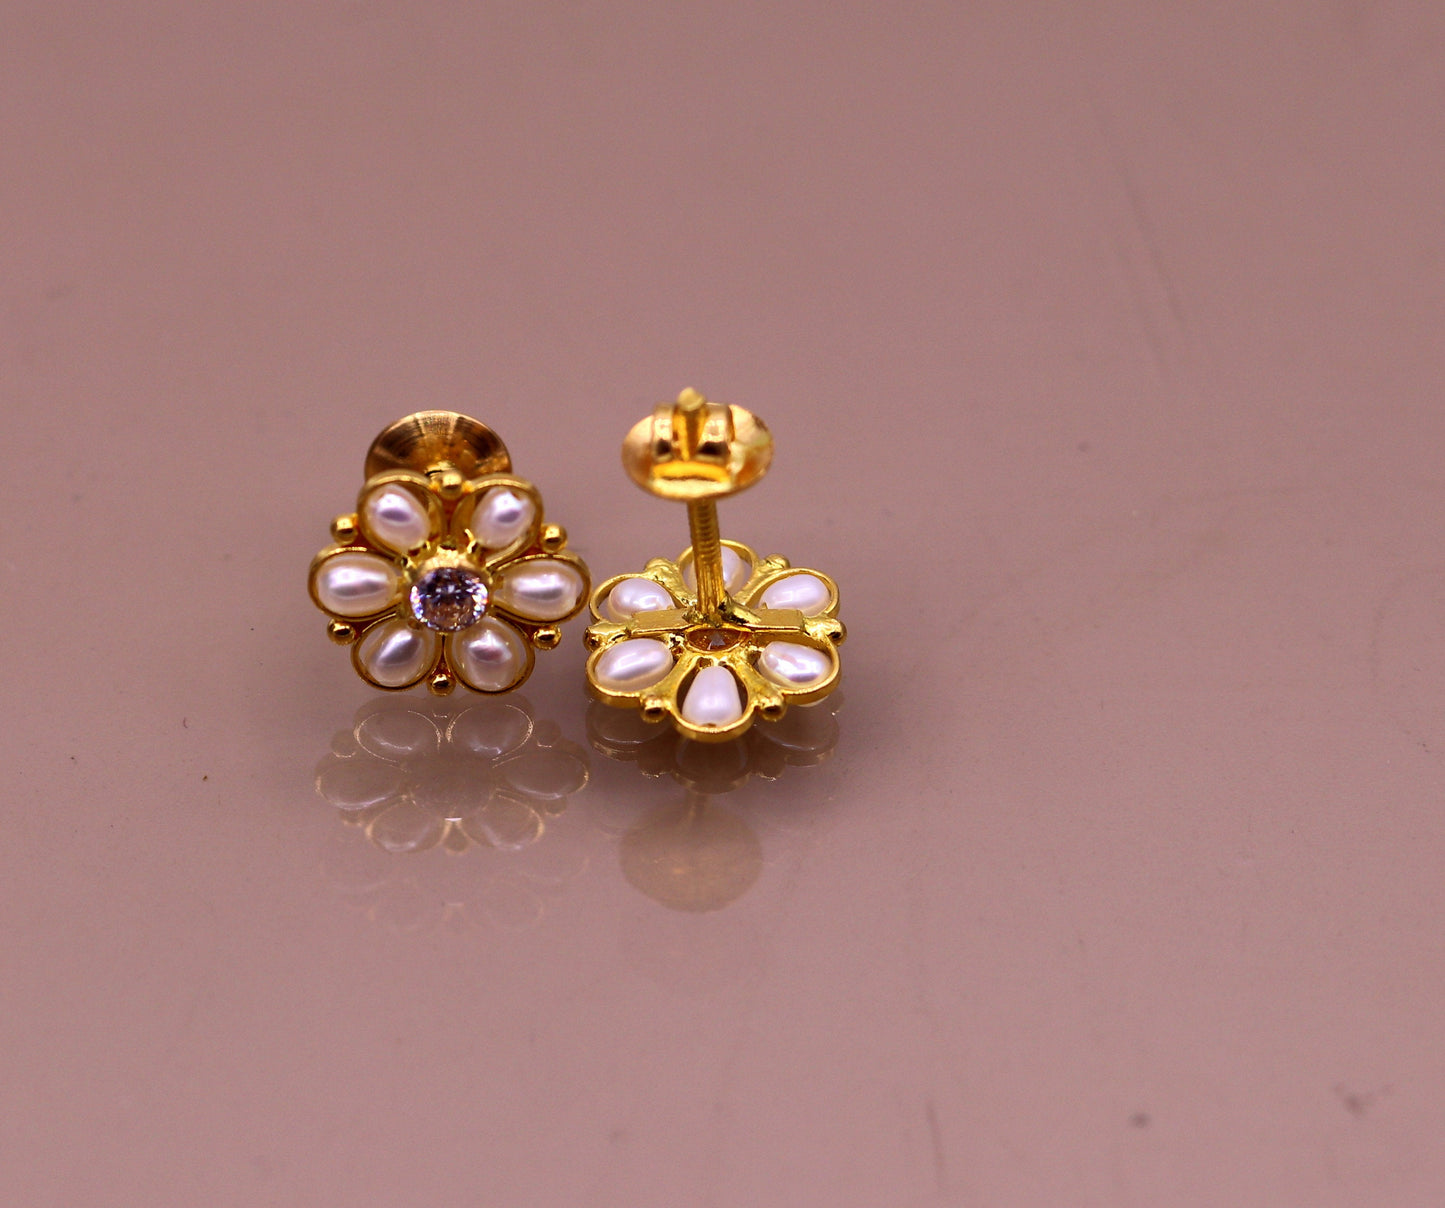 22kt yellow gold handmade stud earrings with fabulous pearl and cubic zircon earrings stylish modern girl's jewelry from india - TRIBAL ORNAMENTS